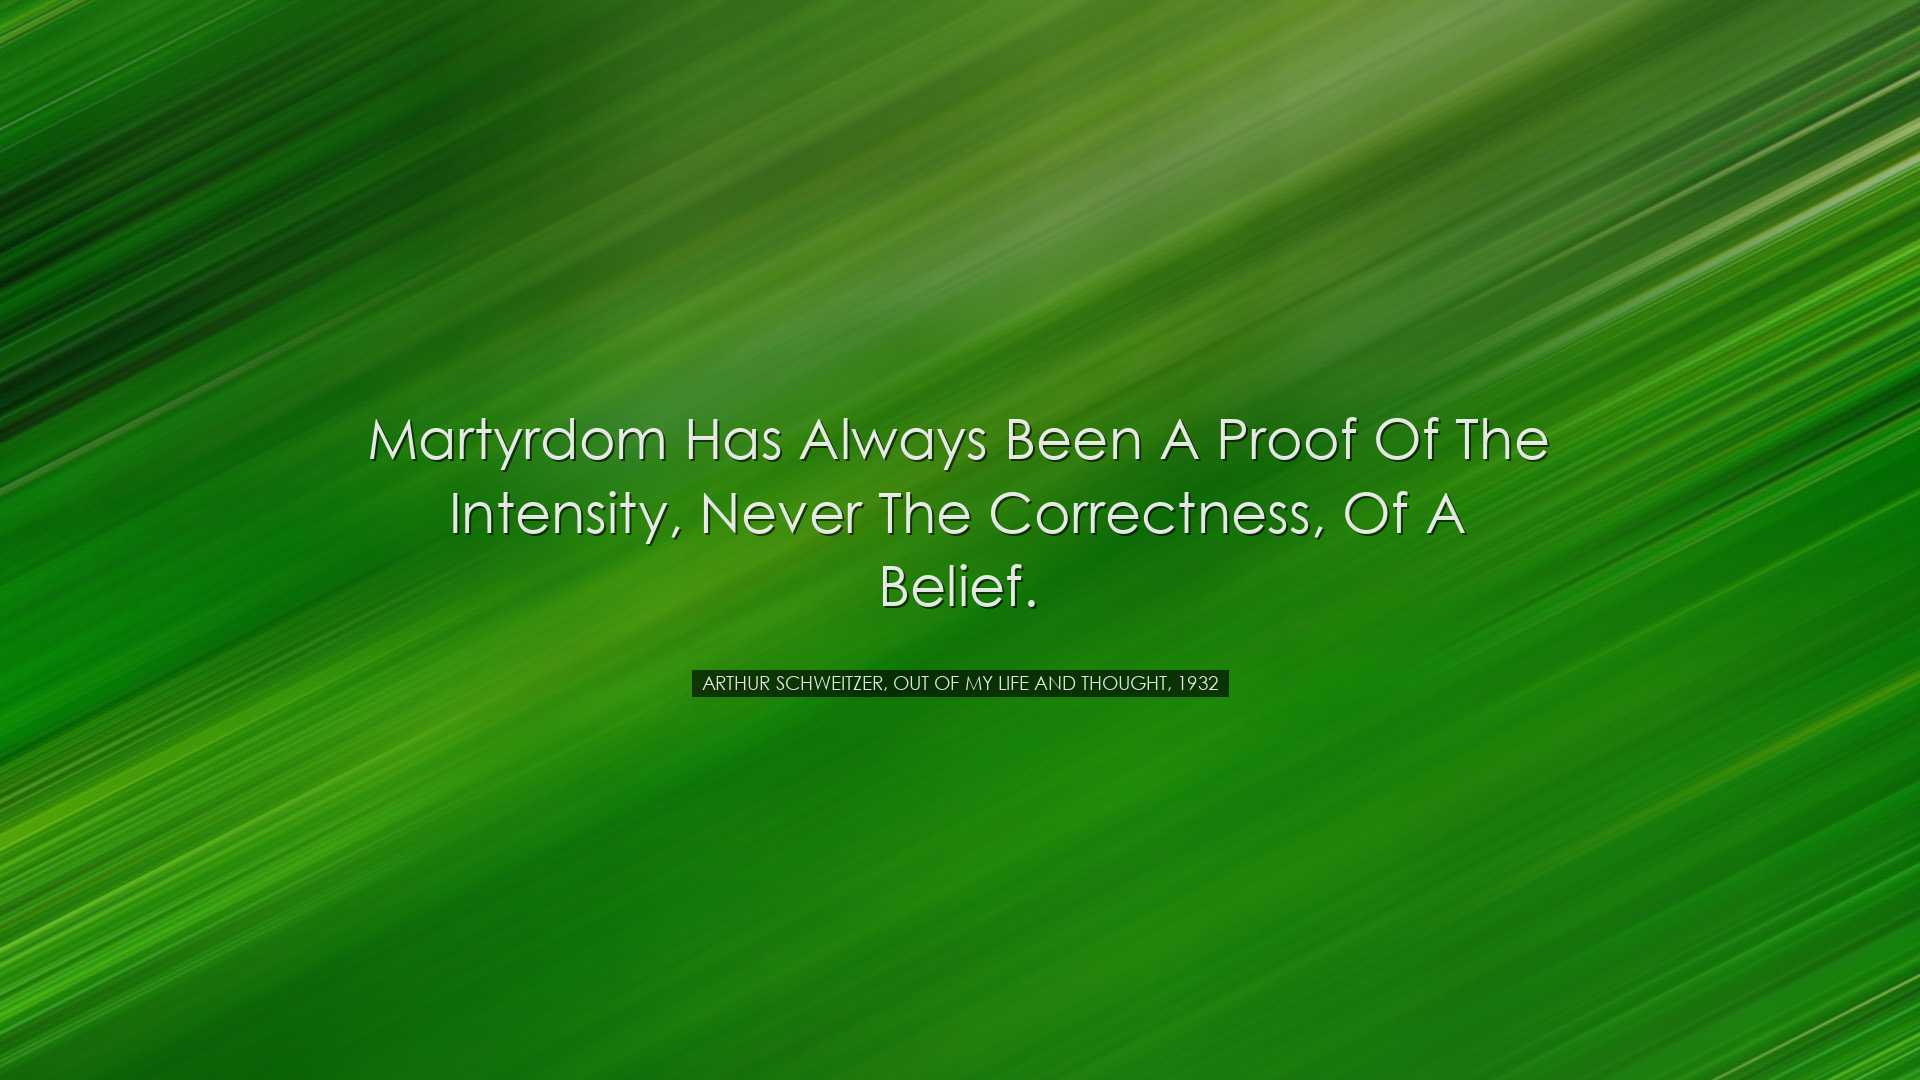 Martyrdom has always been a proof of the intensity, never the corr